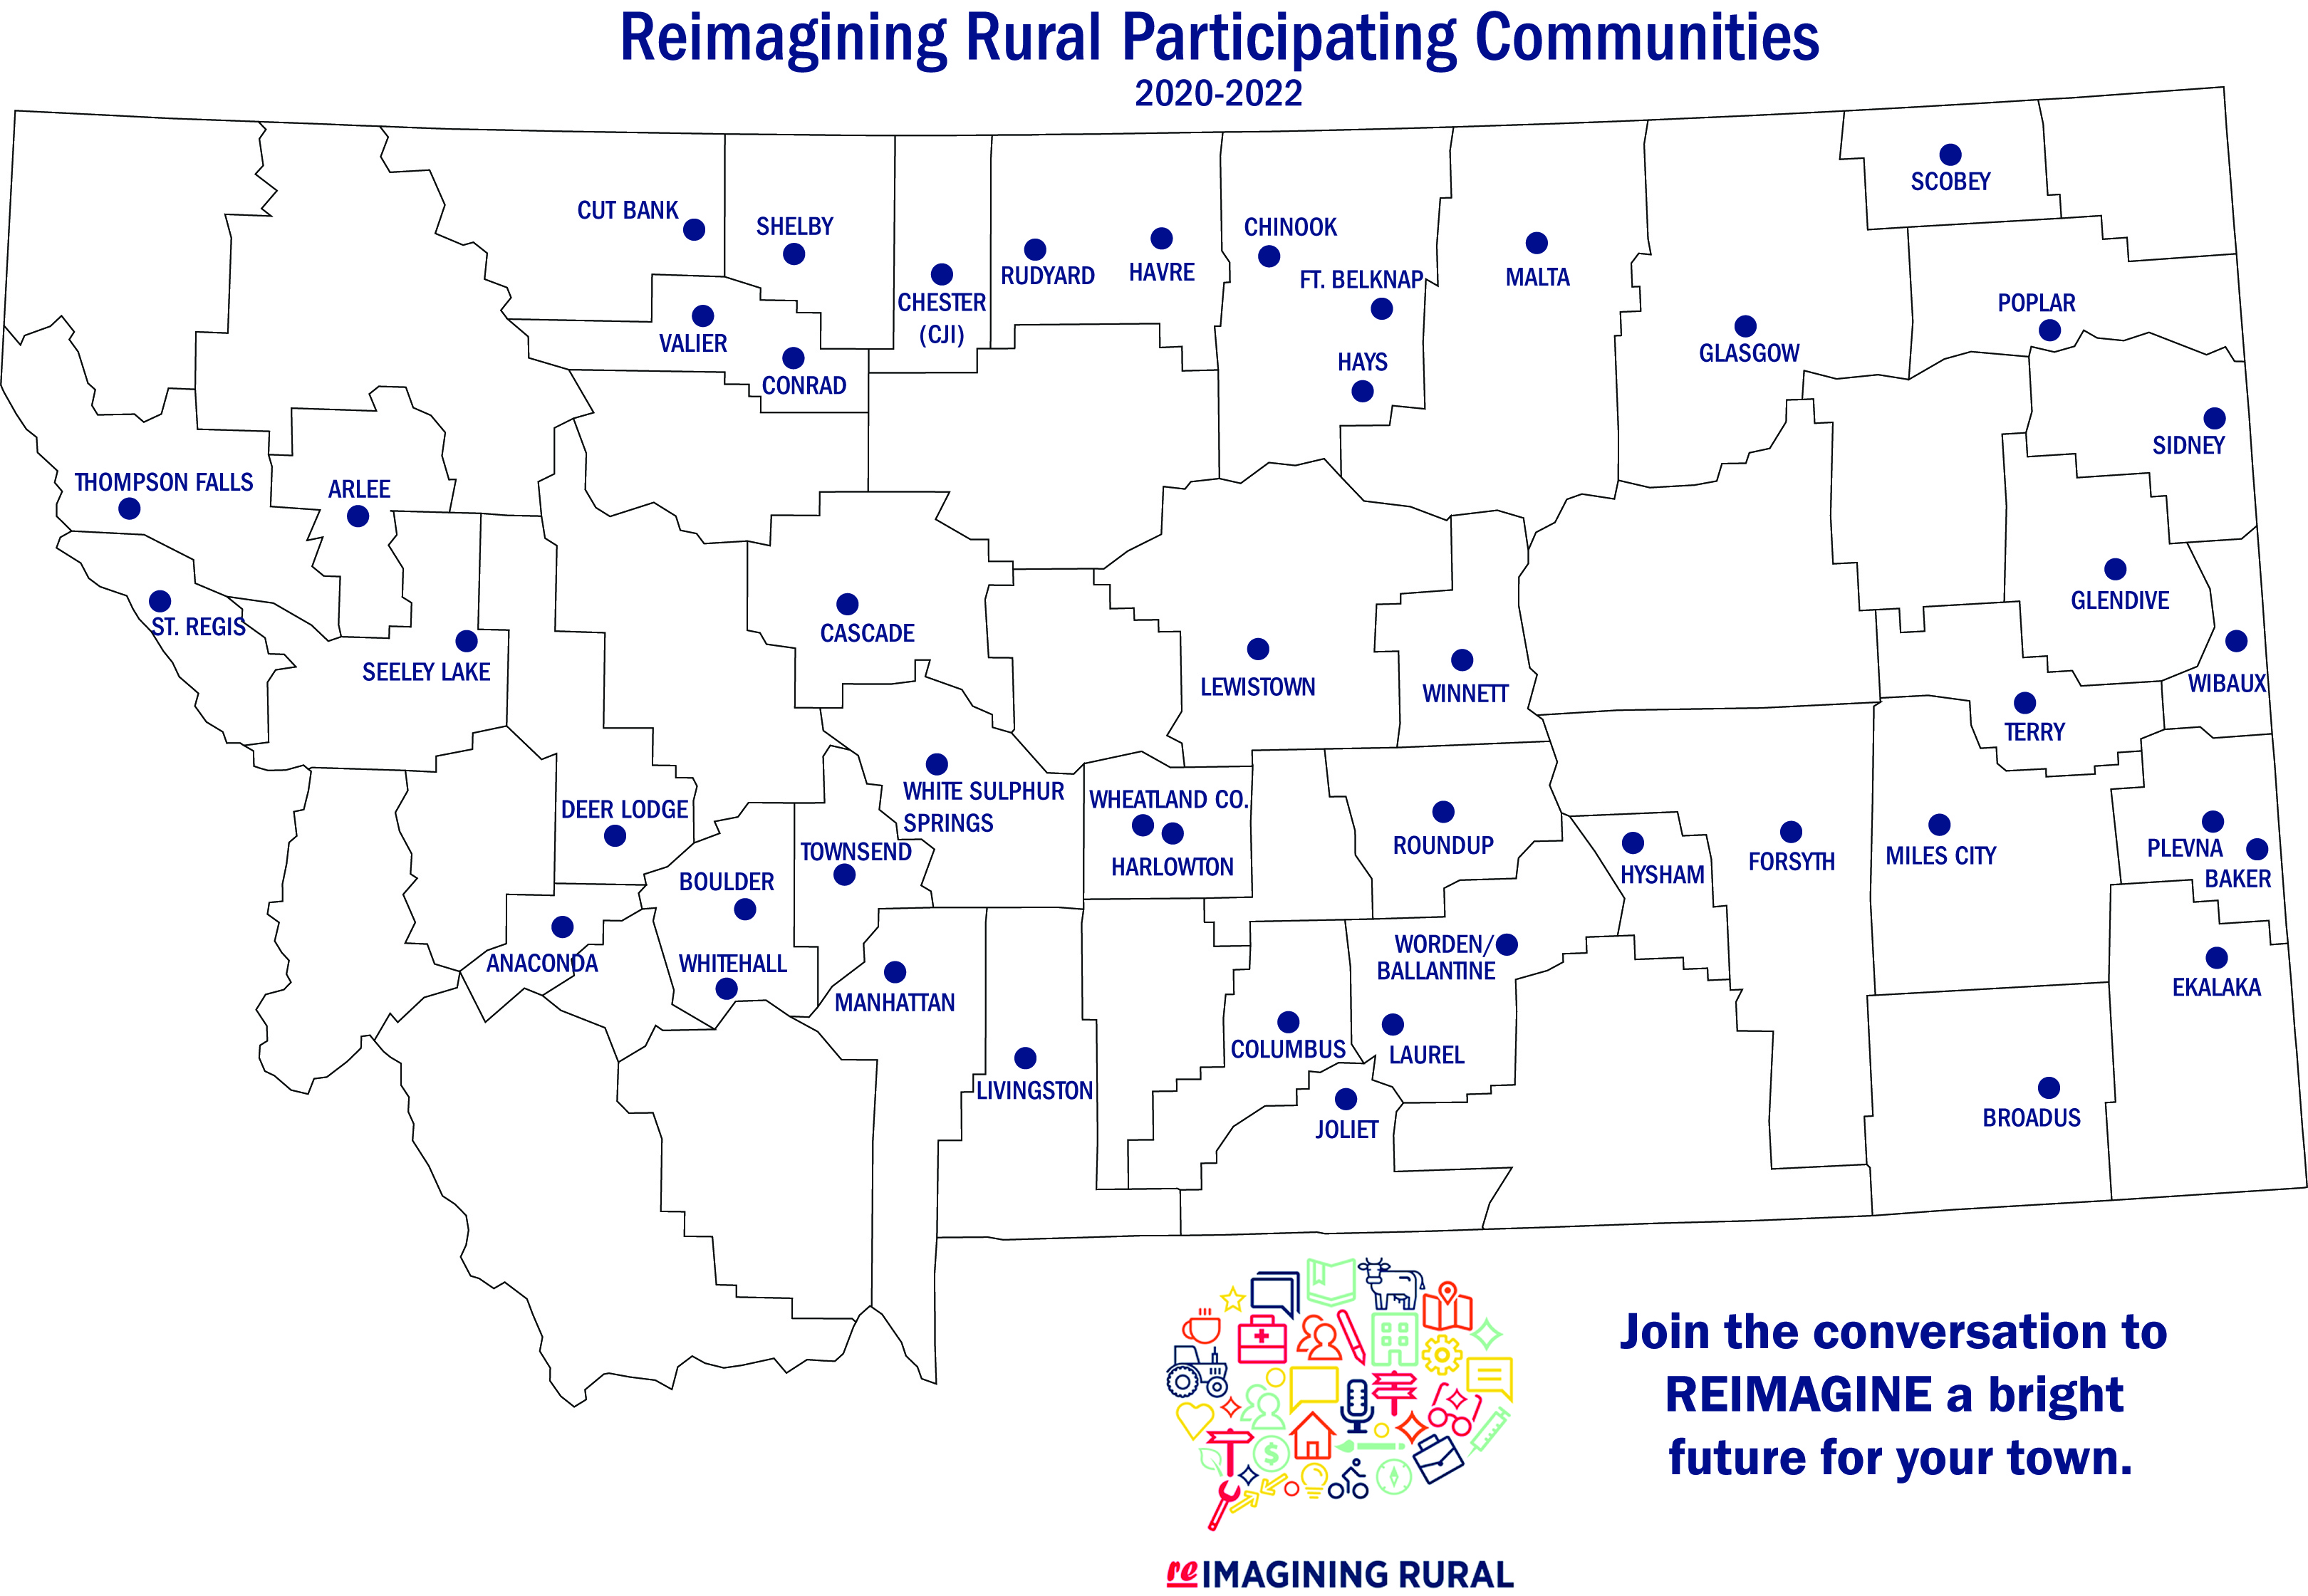 Reimagining Rural participating counties map